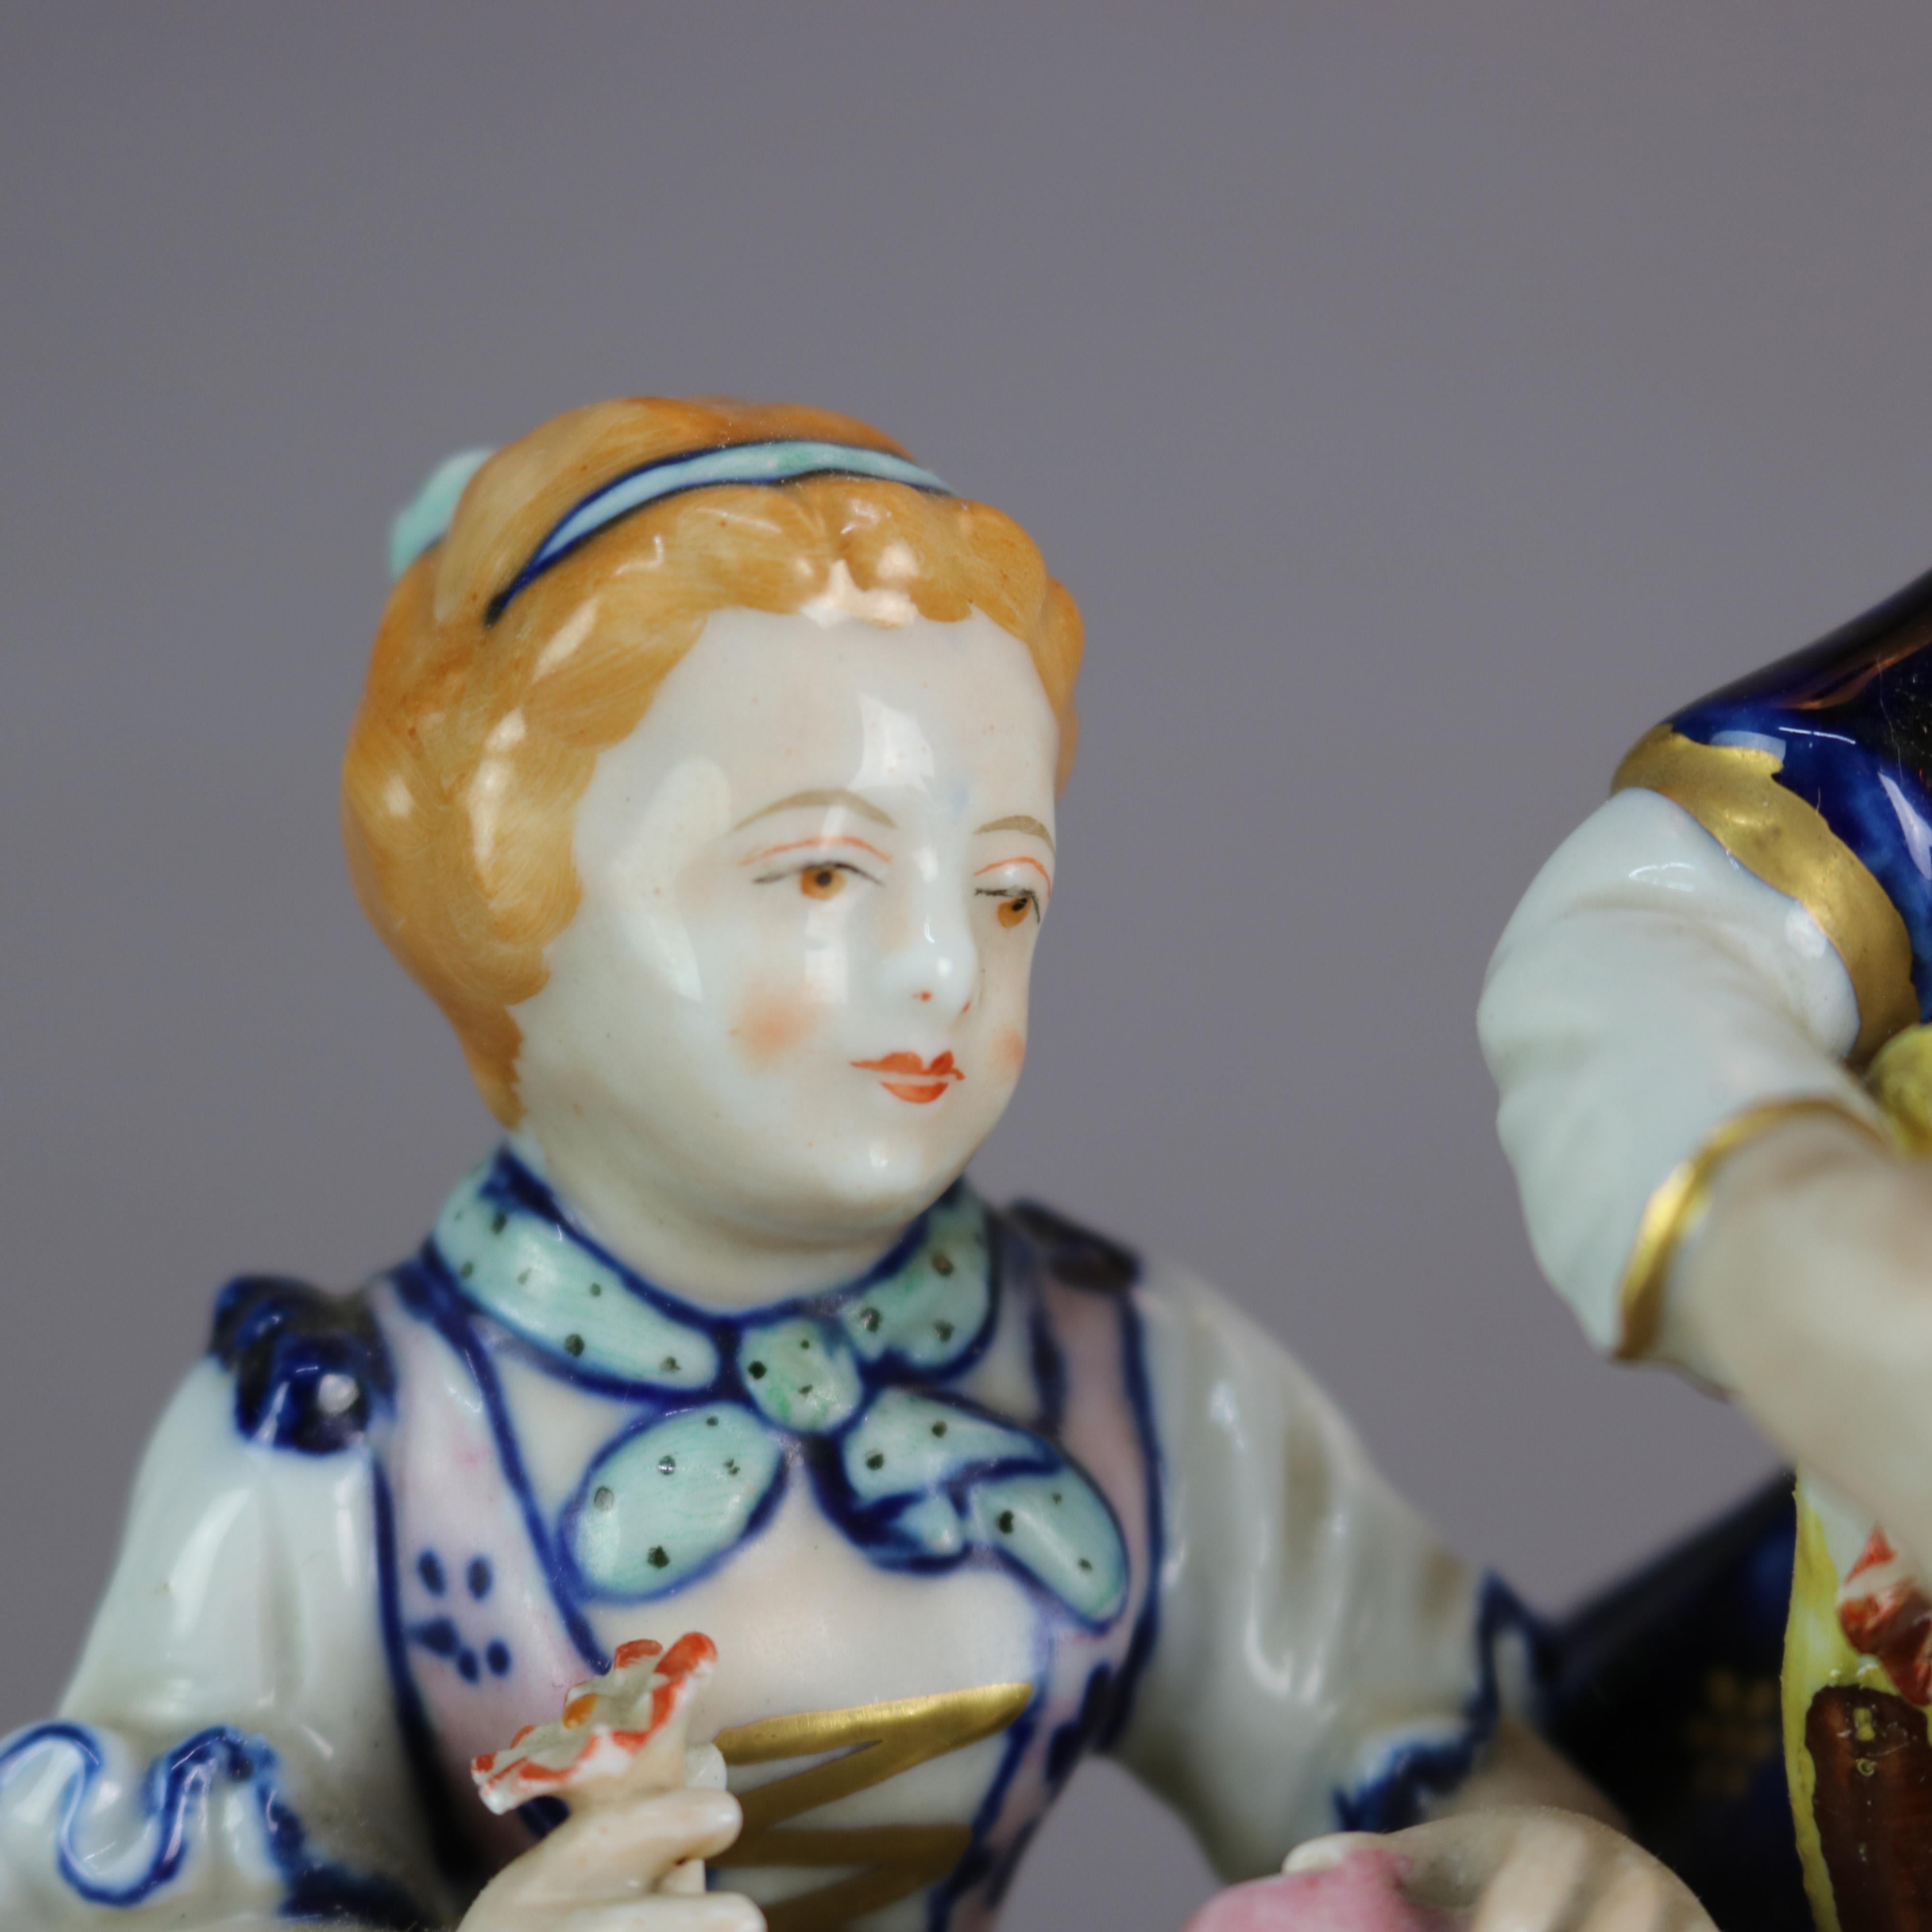 An antique French Sevres porcelain figural grouping depicts hand painted courting scene of boy and girl in countryside setting, raised on foliate cast plinth, gilt highlights, marked on base as photographed, c1880

Measures: 6.5